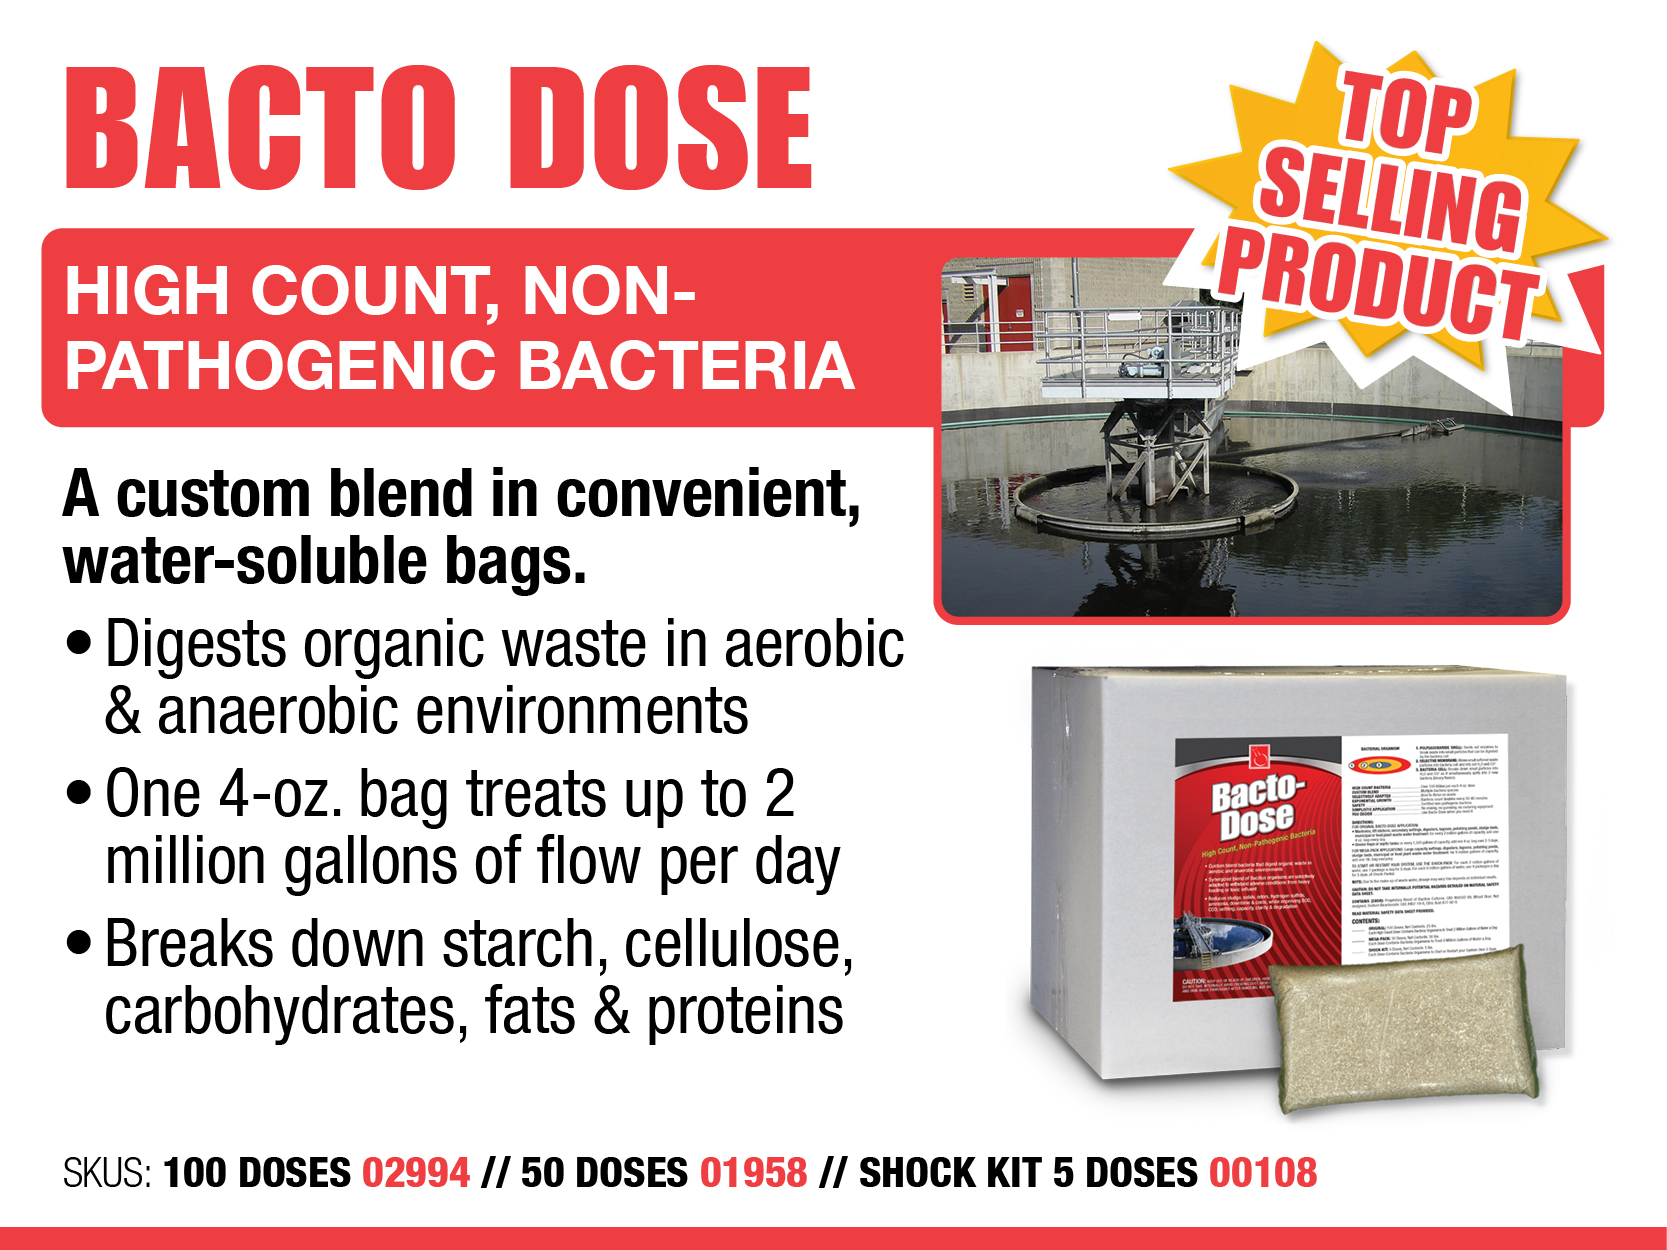 Bacto Dose - High Count, Non-Pathogenic Bacteria - Wastewater Essentials  - Collections, Plants, and Lagoons - Wastewater Treatment